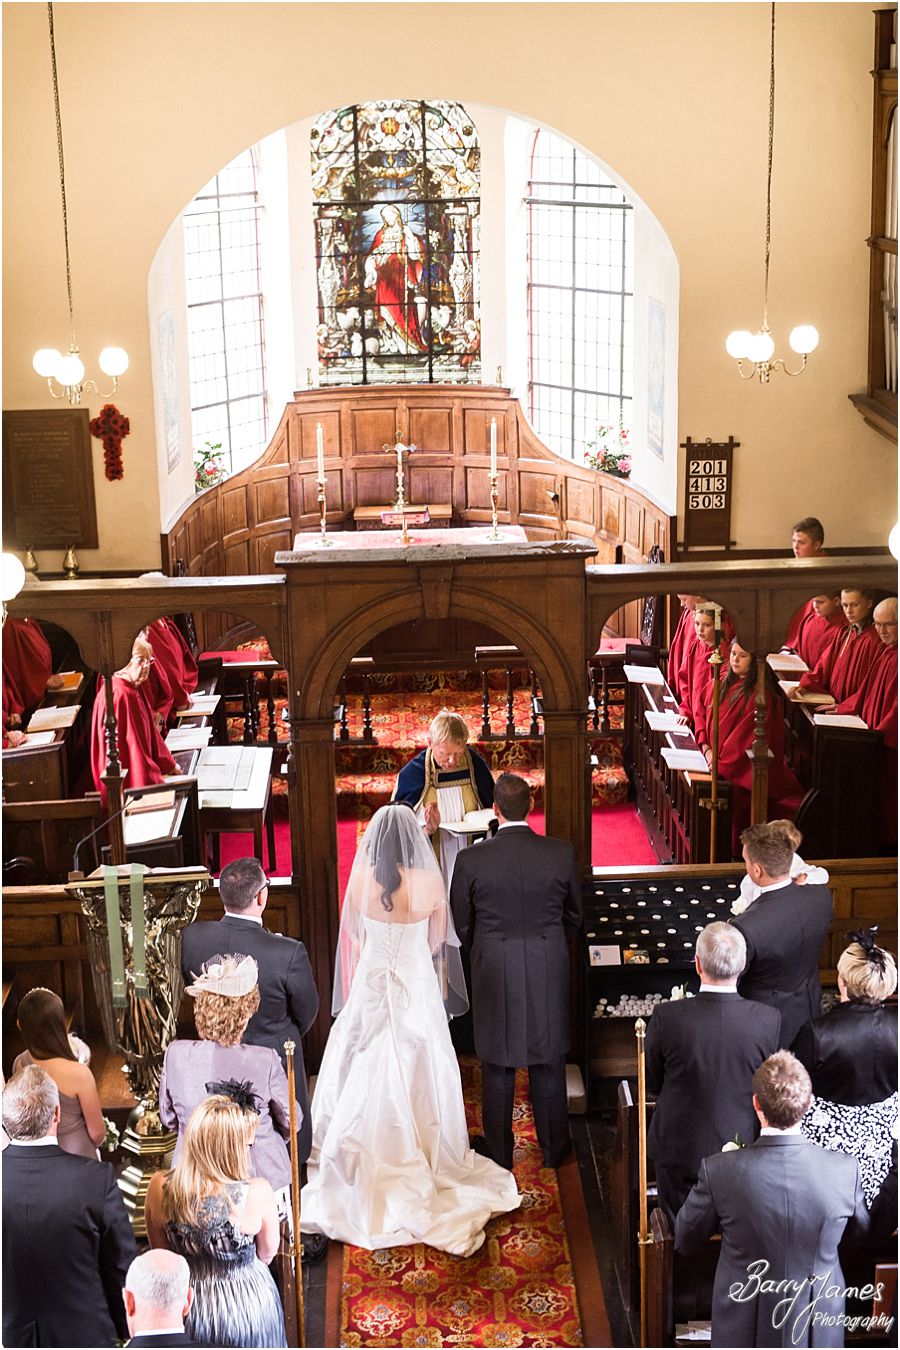 Stunning wedding photography at Himley Church in Dudley by Staffordshire Wedding Photographer Barry James